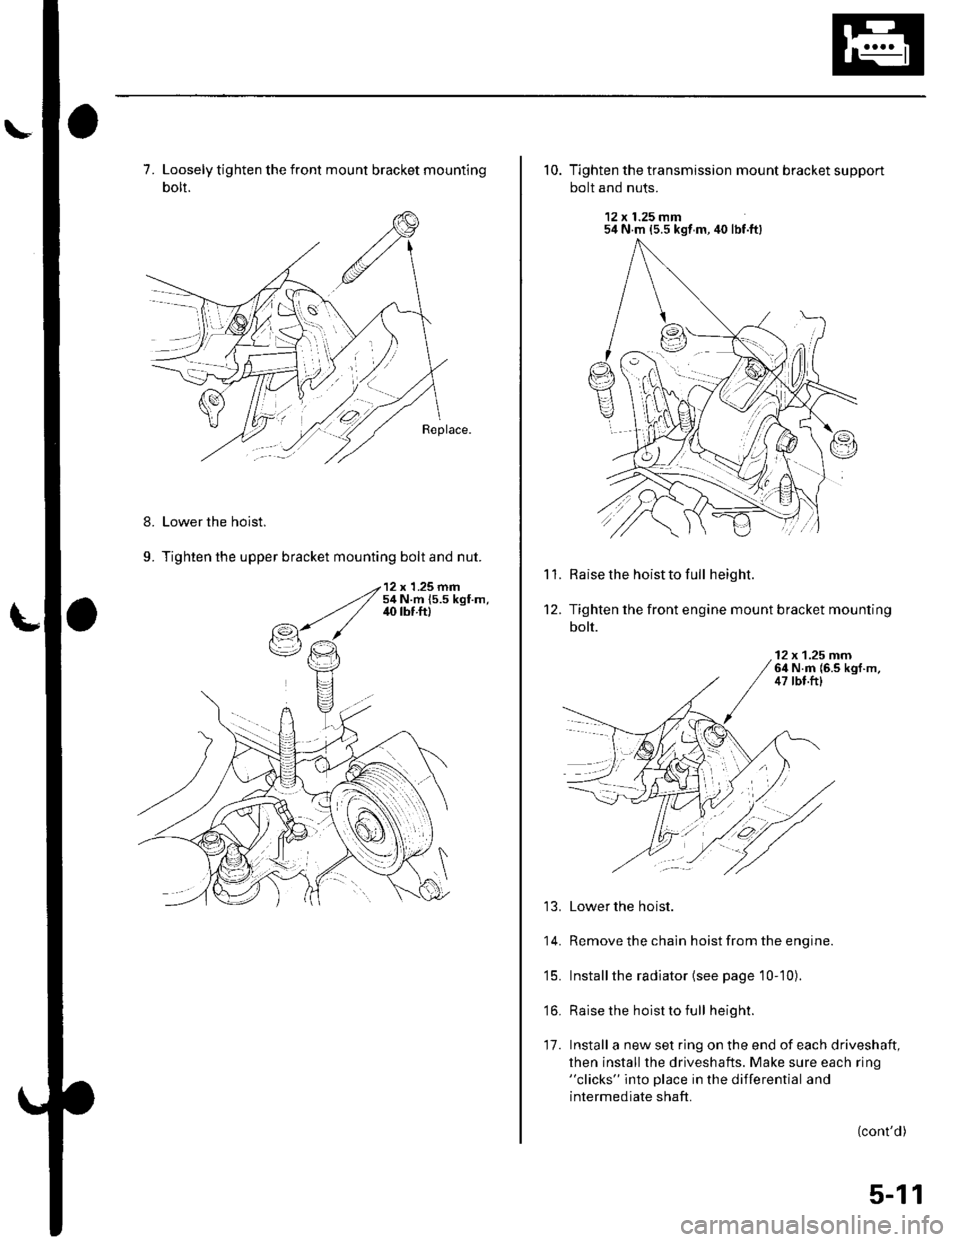 HONDA CIVIC 2003 7.G Workshop Manual 7. Loosely tighten the front mount bracket mounting
bolt.
Lower the hoist.
Tighten the upper bracket mounting bolt and nut.
8.
9.
10. Tighten the transmission mount bracket support
bolt and nuts.
12 x